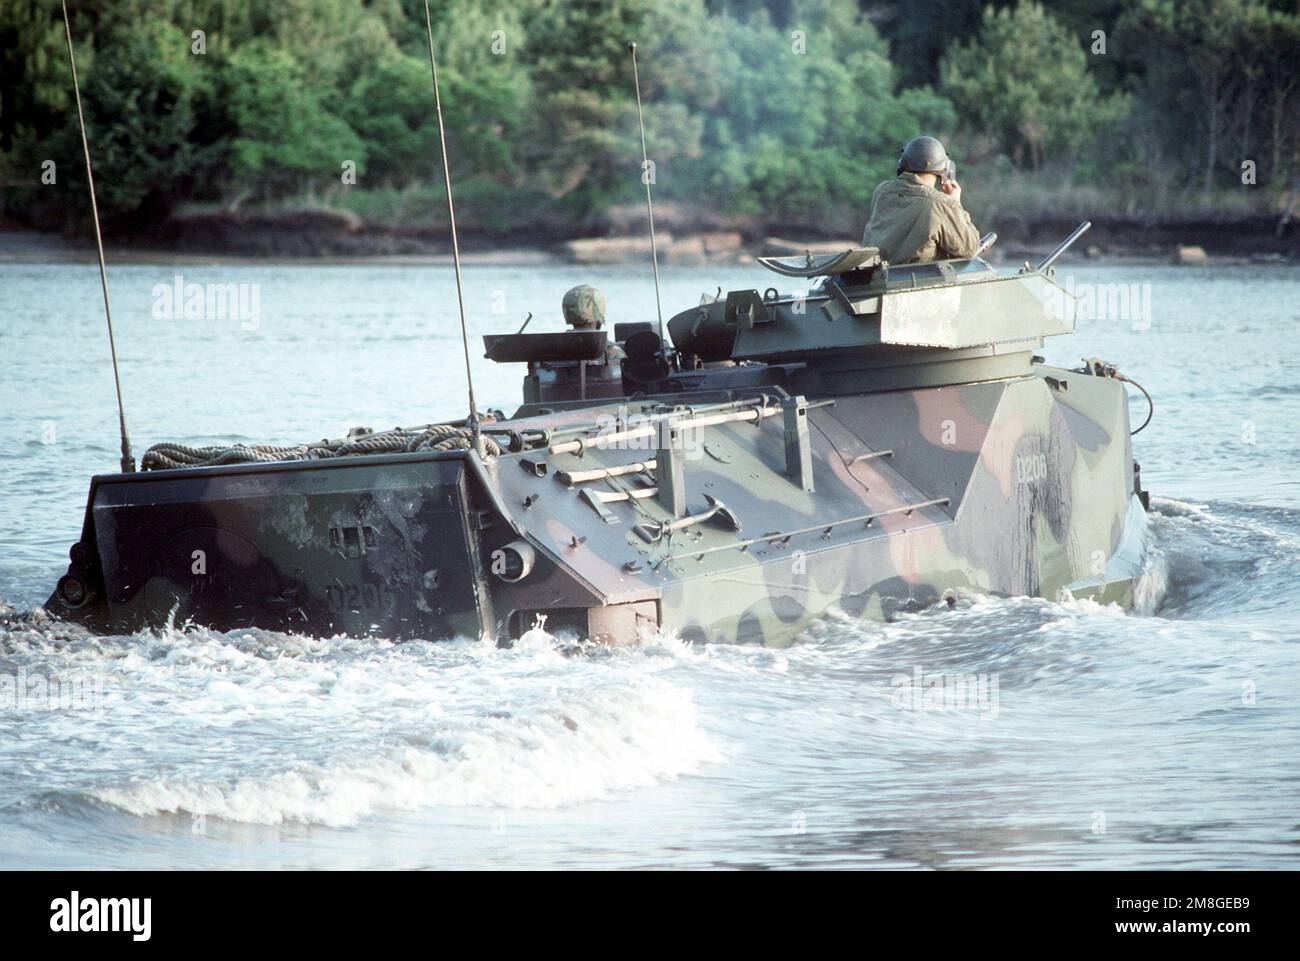 A Marine AAV-7A1 armored assault vehicle makes its way to a beach with Marines of the 3rd Battalion, Camp Lejeune, N.C., as part of a joint military exercise called Ocean Venture '92 off the coast of North Carolina. Subject Operation/Series: OCEAN VENTURE '92 Country: Atlantic Ocean (AOC) Stock Photo